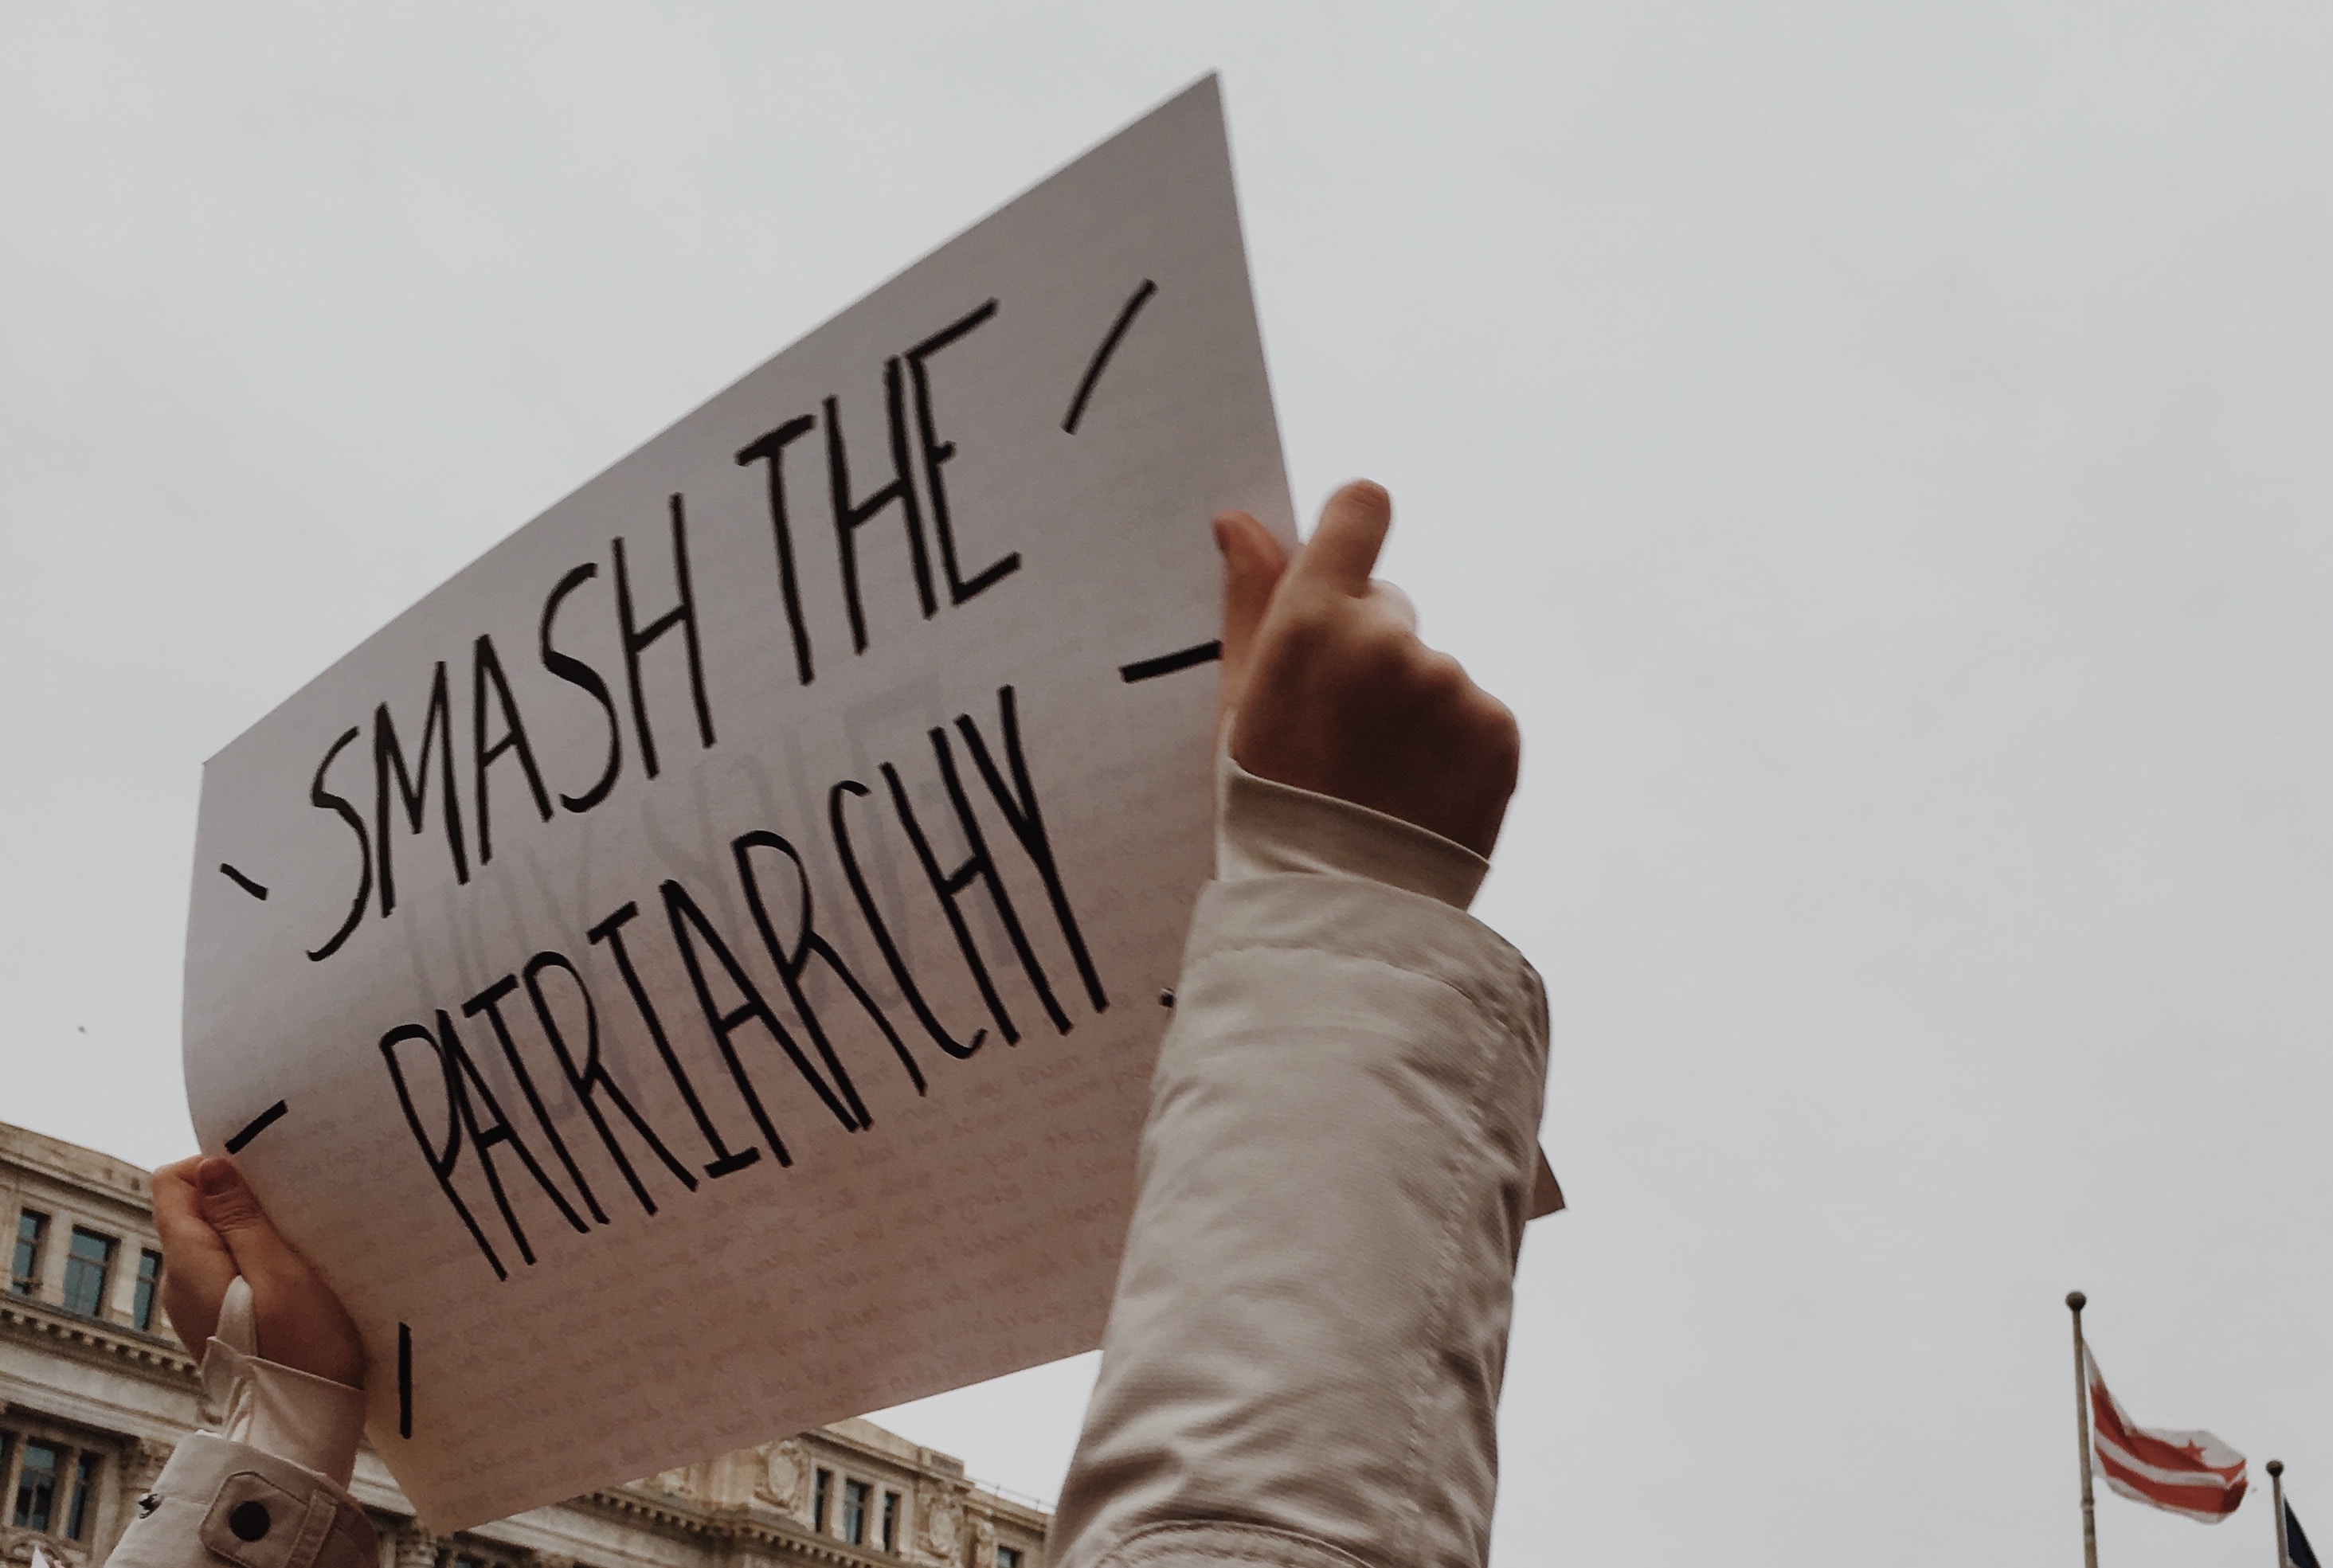 Smash the Patriarchy sign